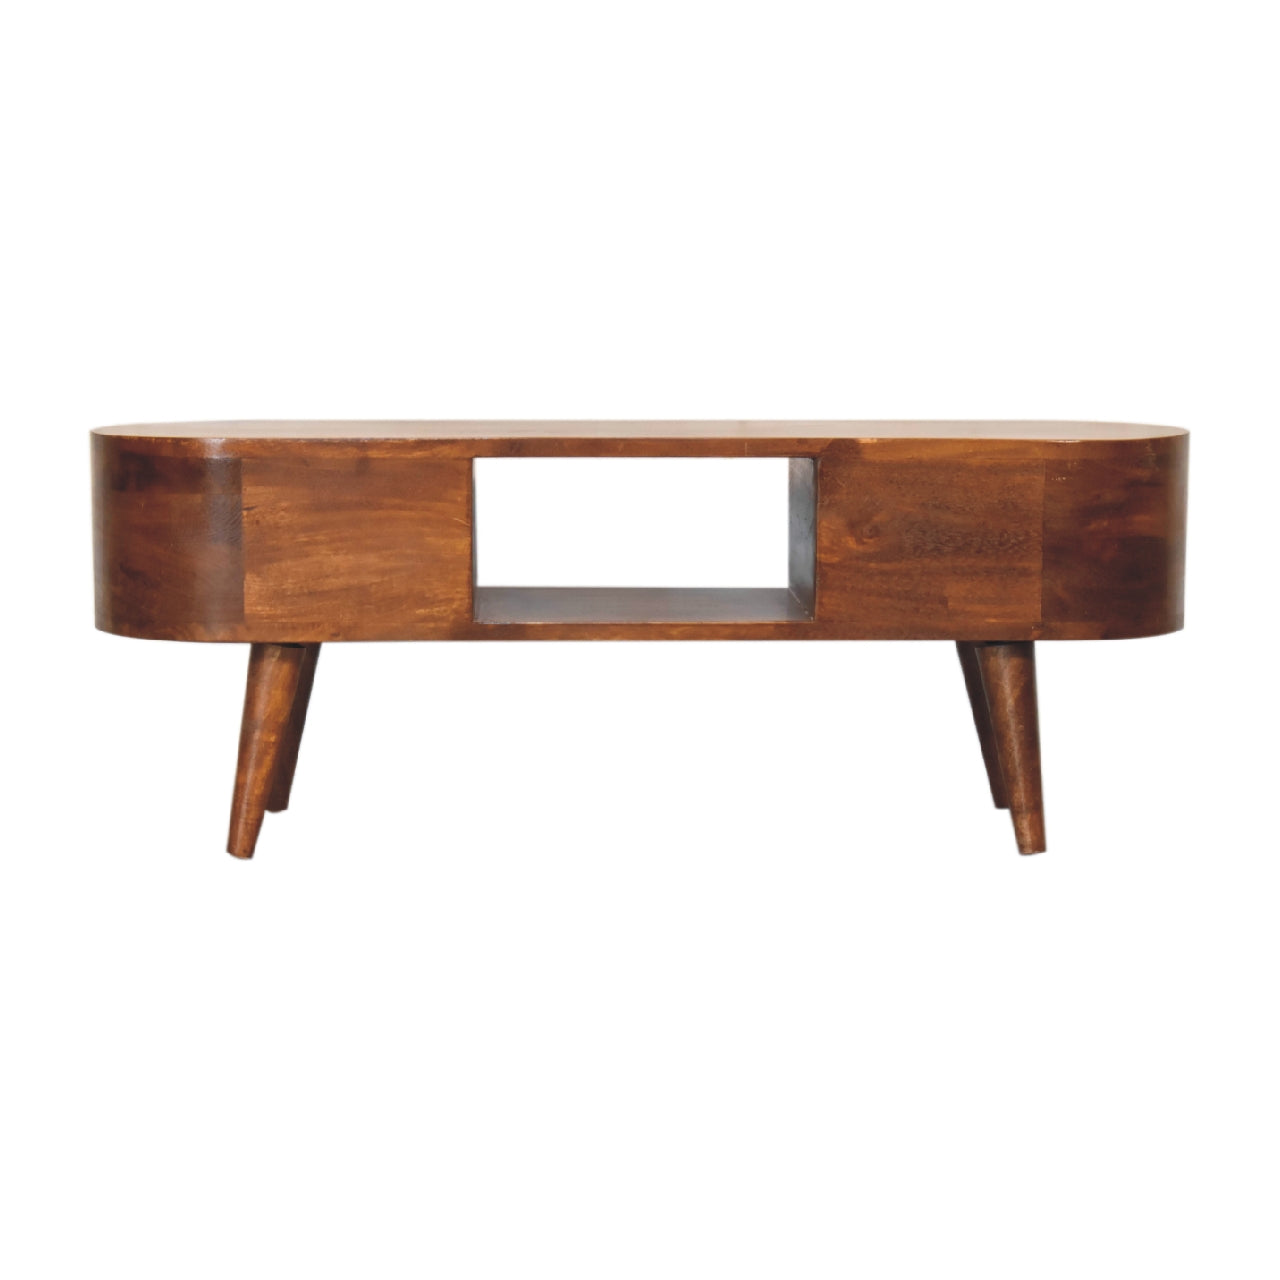 chestnut rounded coffee table with open slot